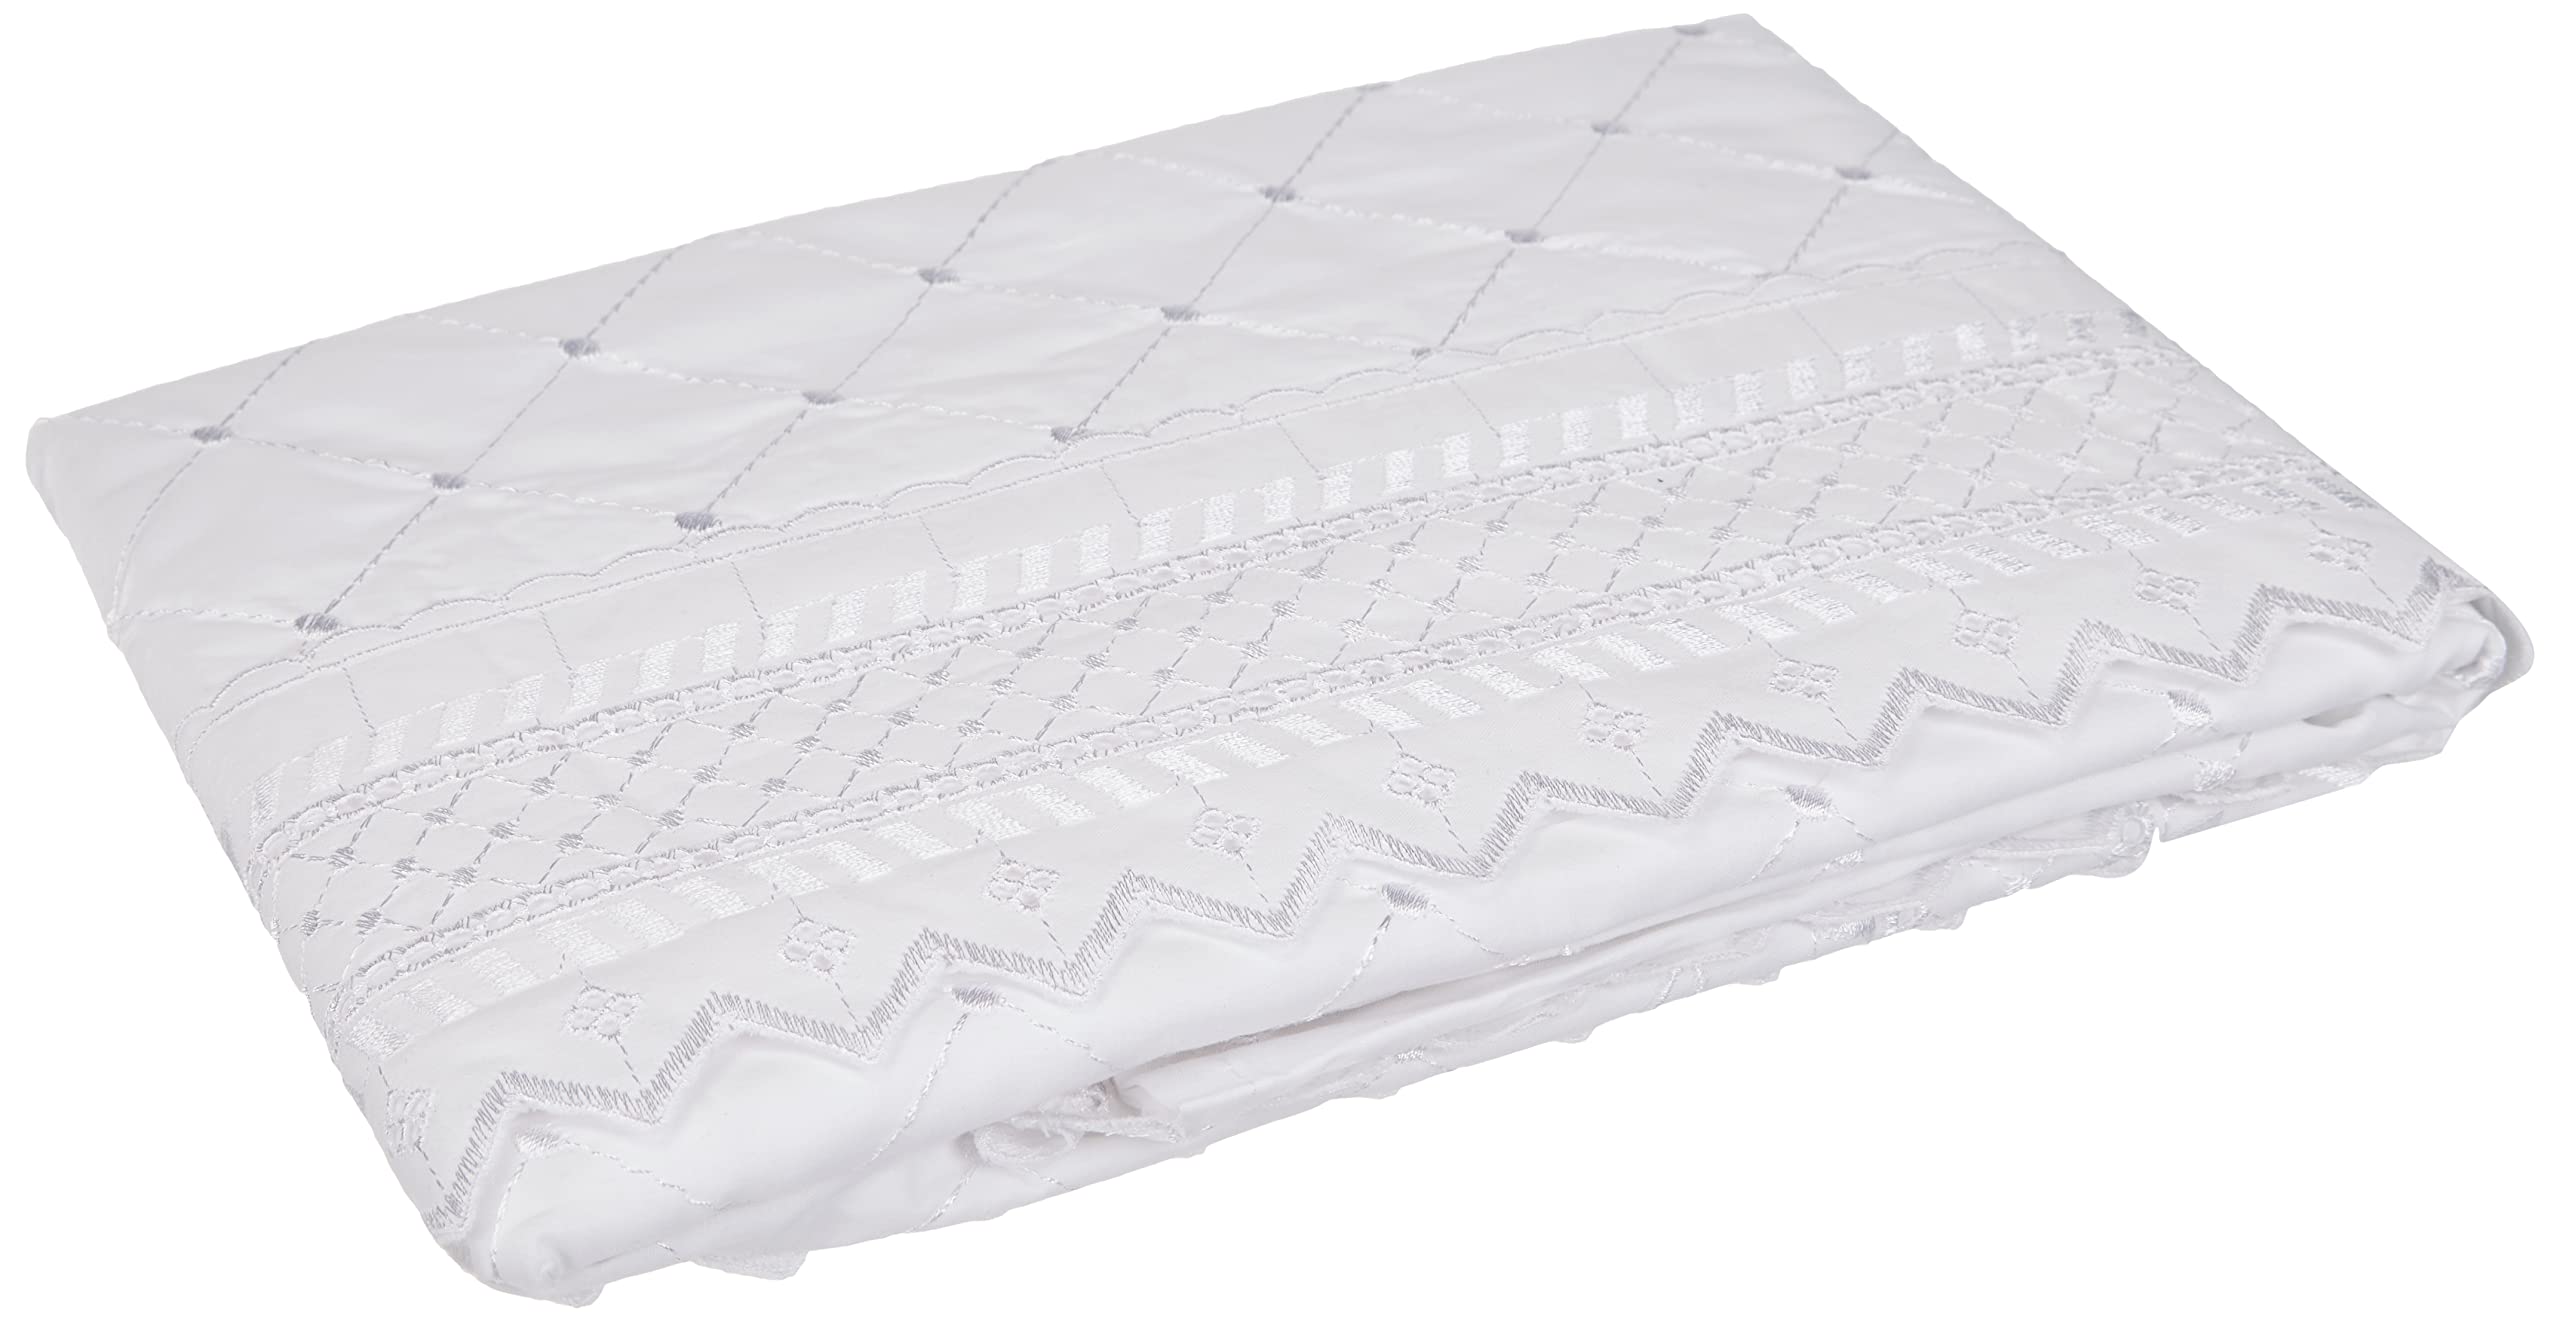 Balmoral Embroidered Housewife Pillowcase Pair Luxury Percale Pillow Cover Bedding, White